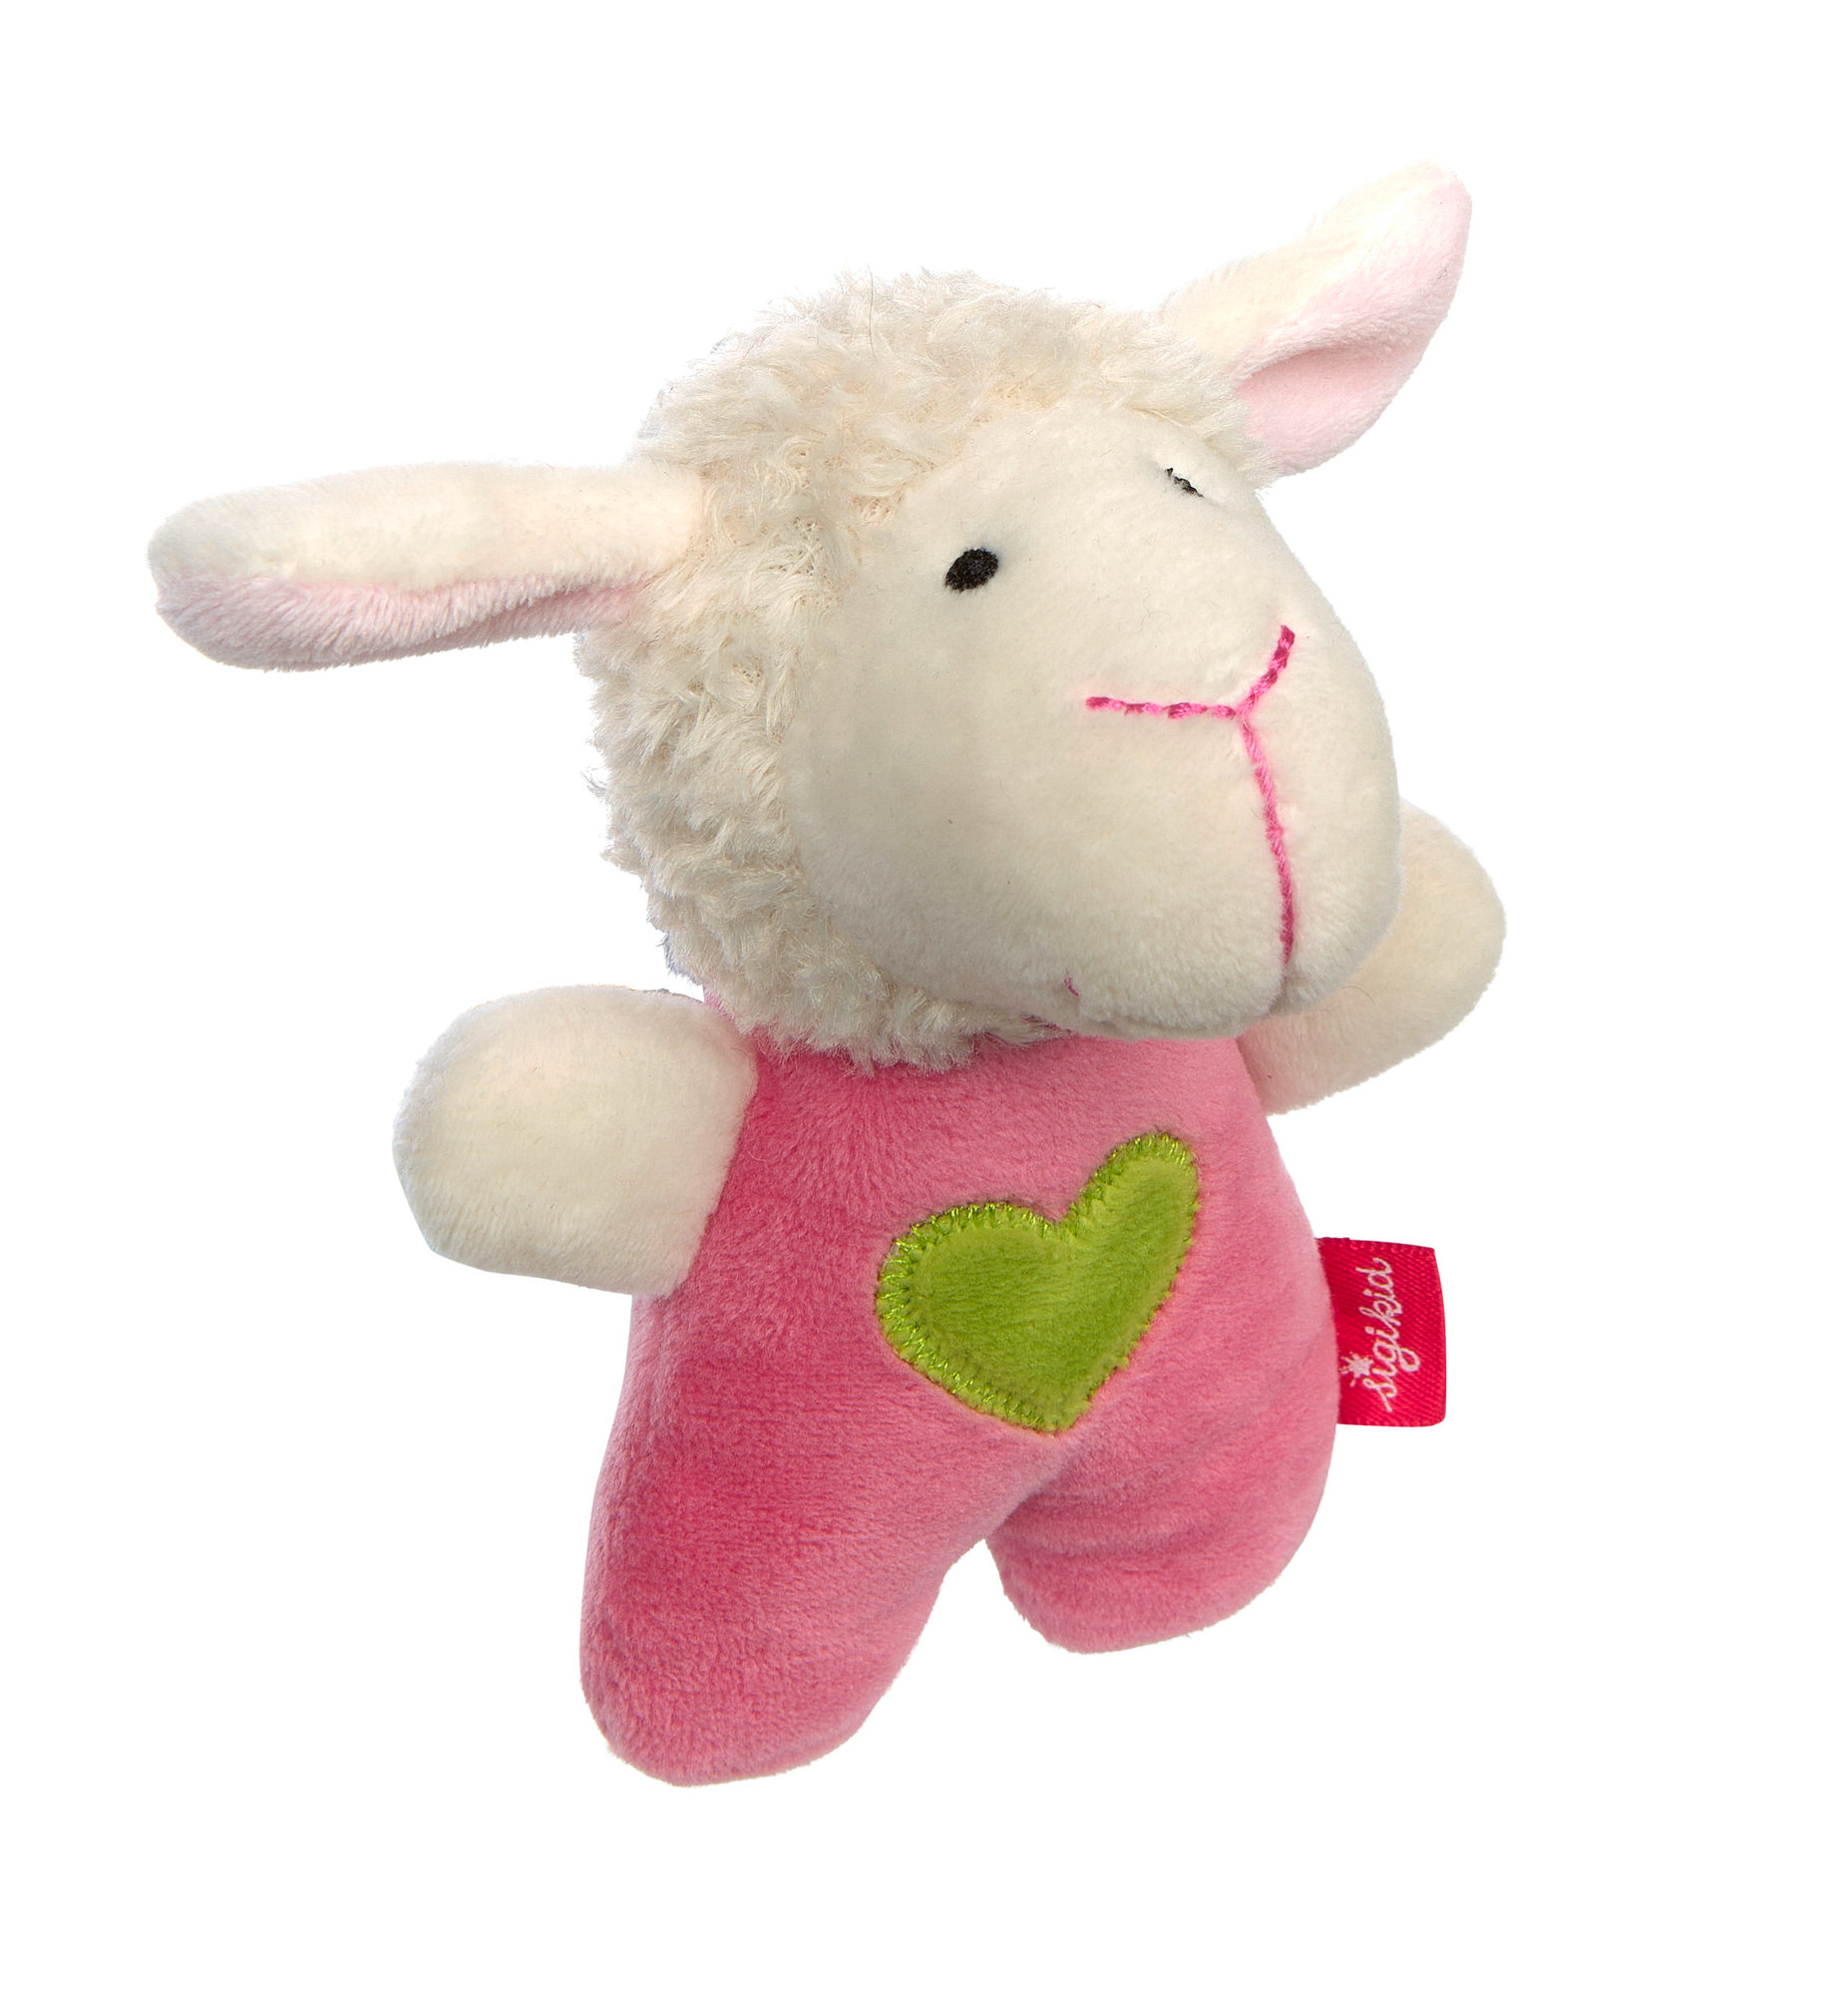 Soft grasp toy sheep, rattle inside